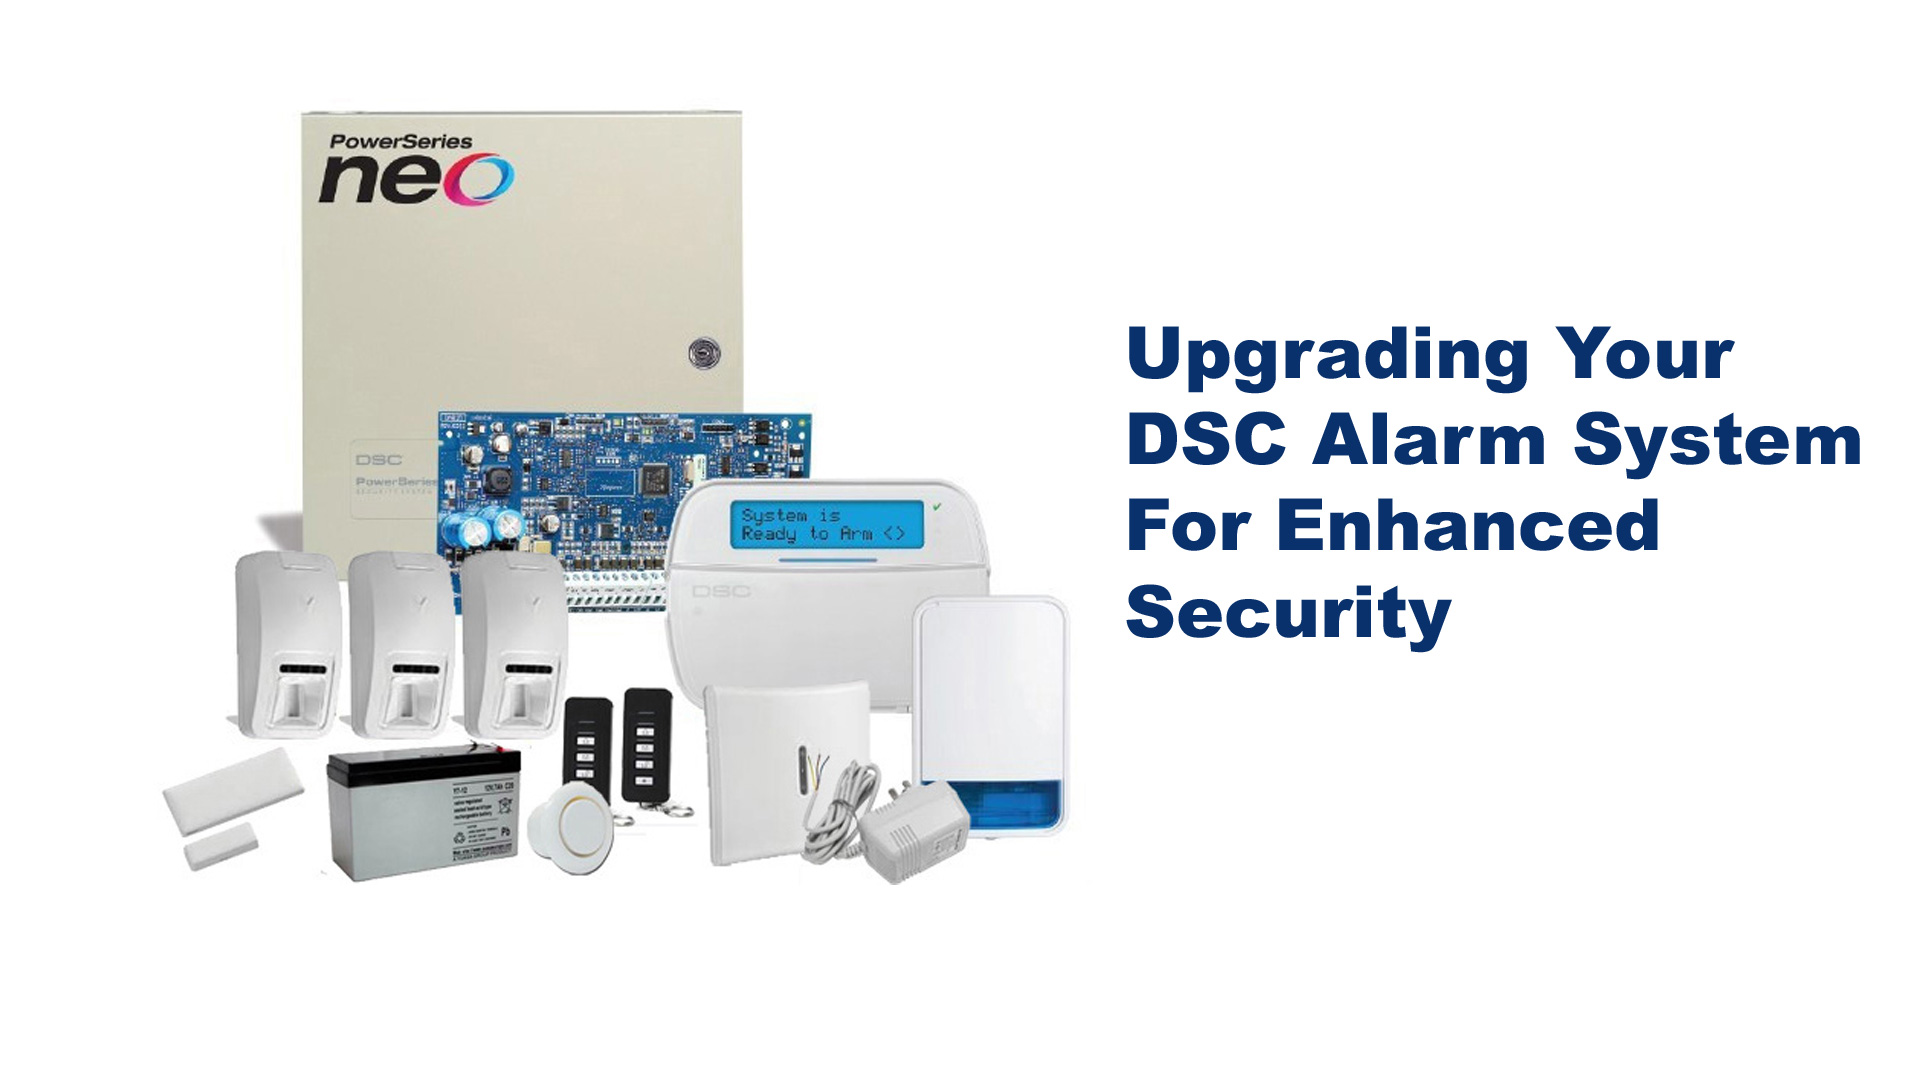 Upgrading Your DSC Alarm System For Enhanced Security